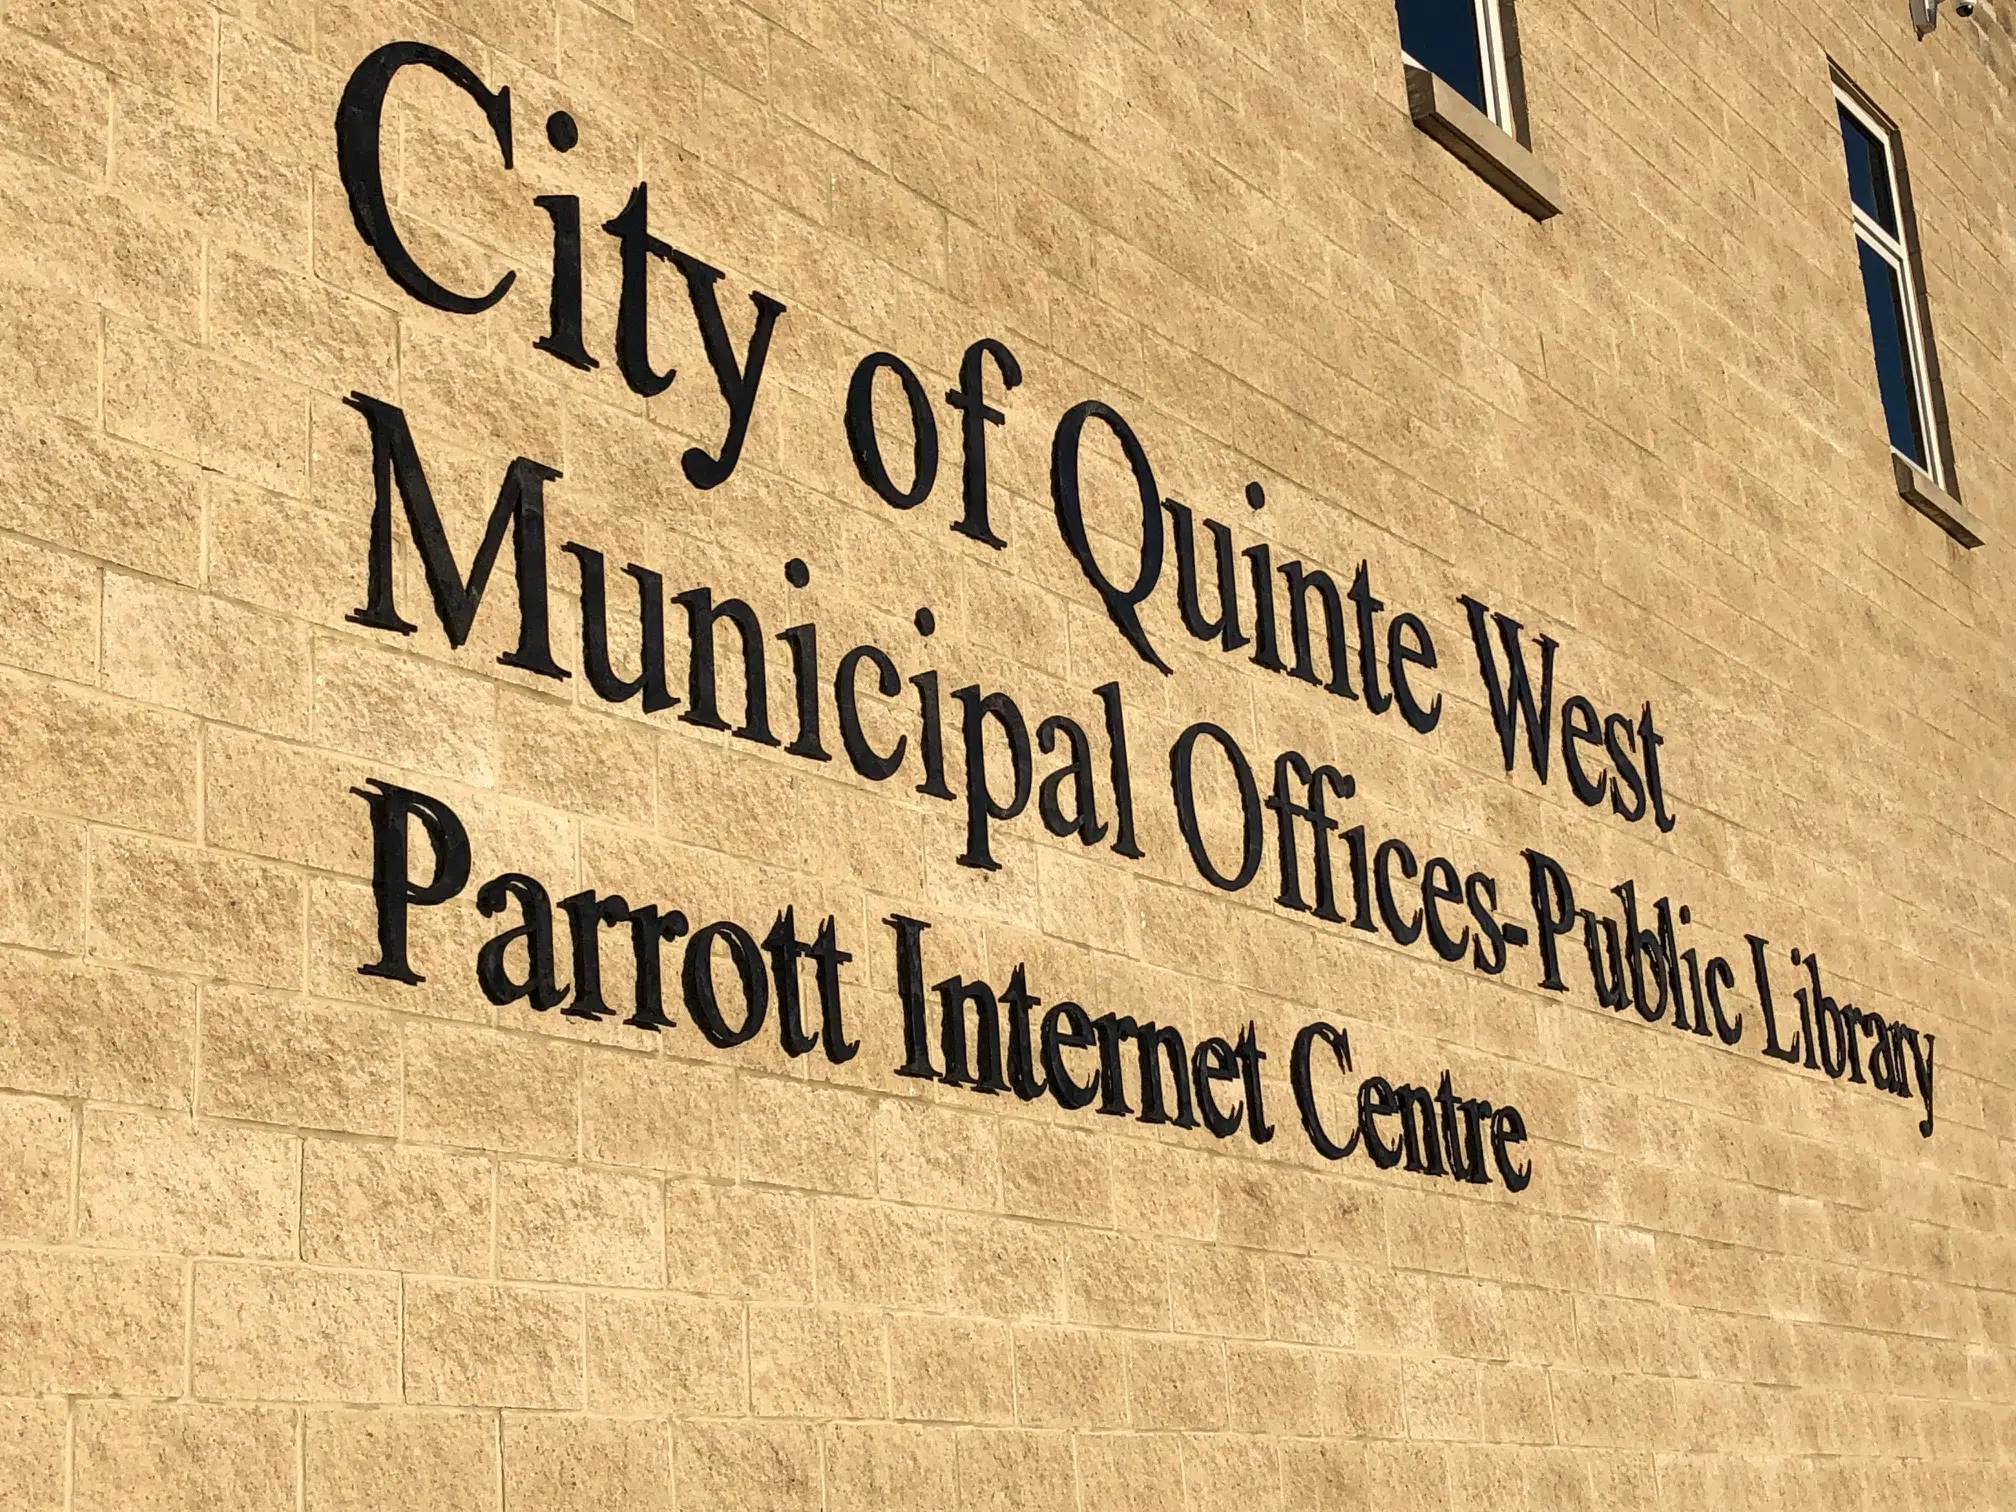 Quinte West solid financially